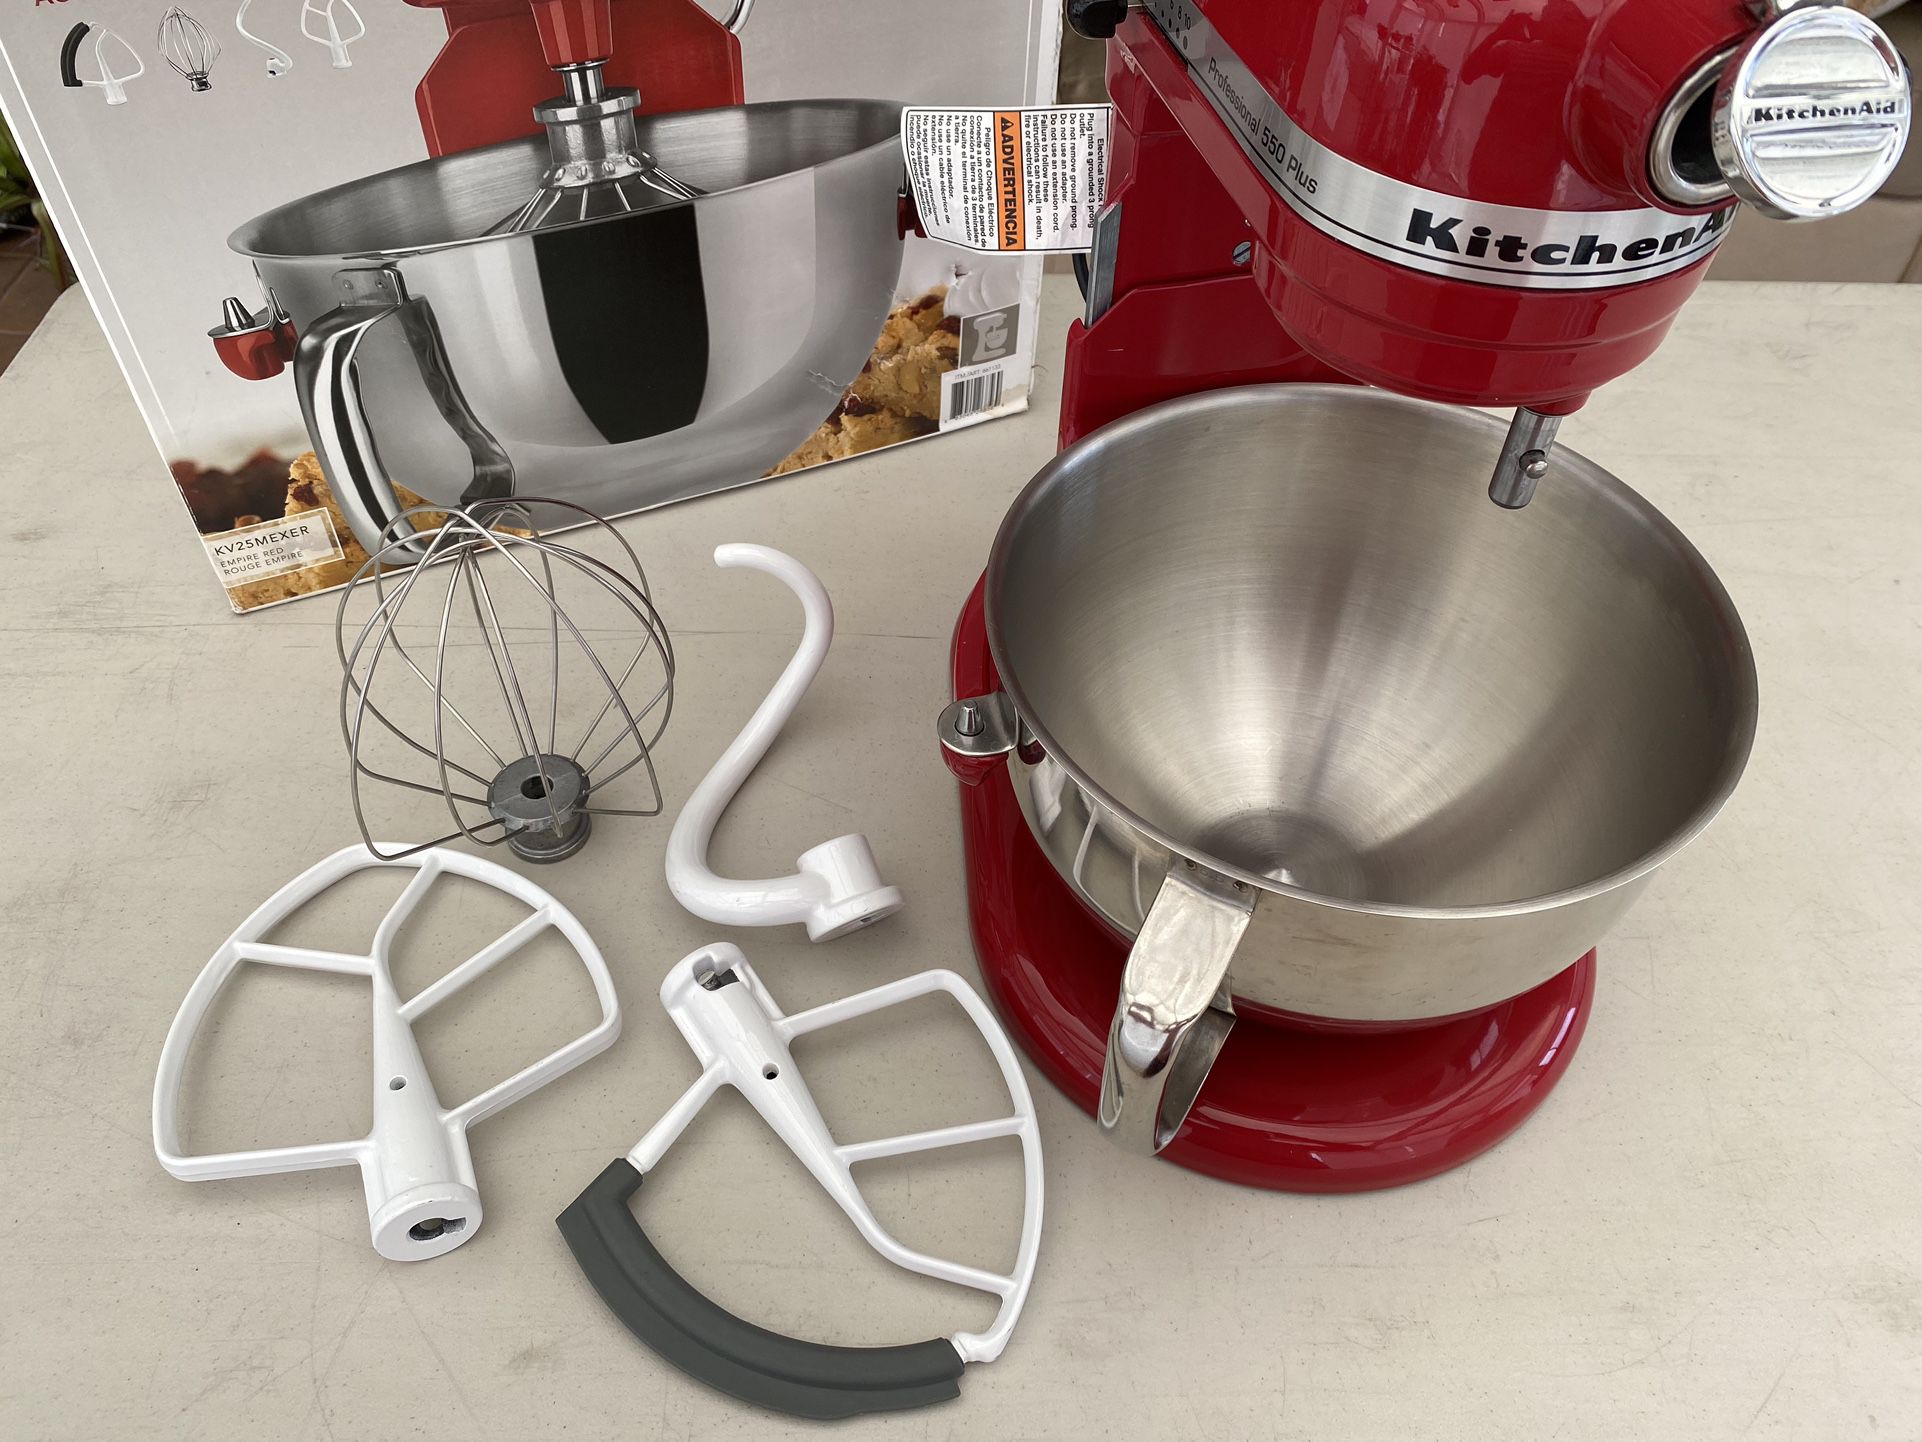 Aucma Stand Mixer $100 for Sale in Henderson, NV - OfferUp